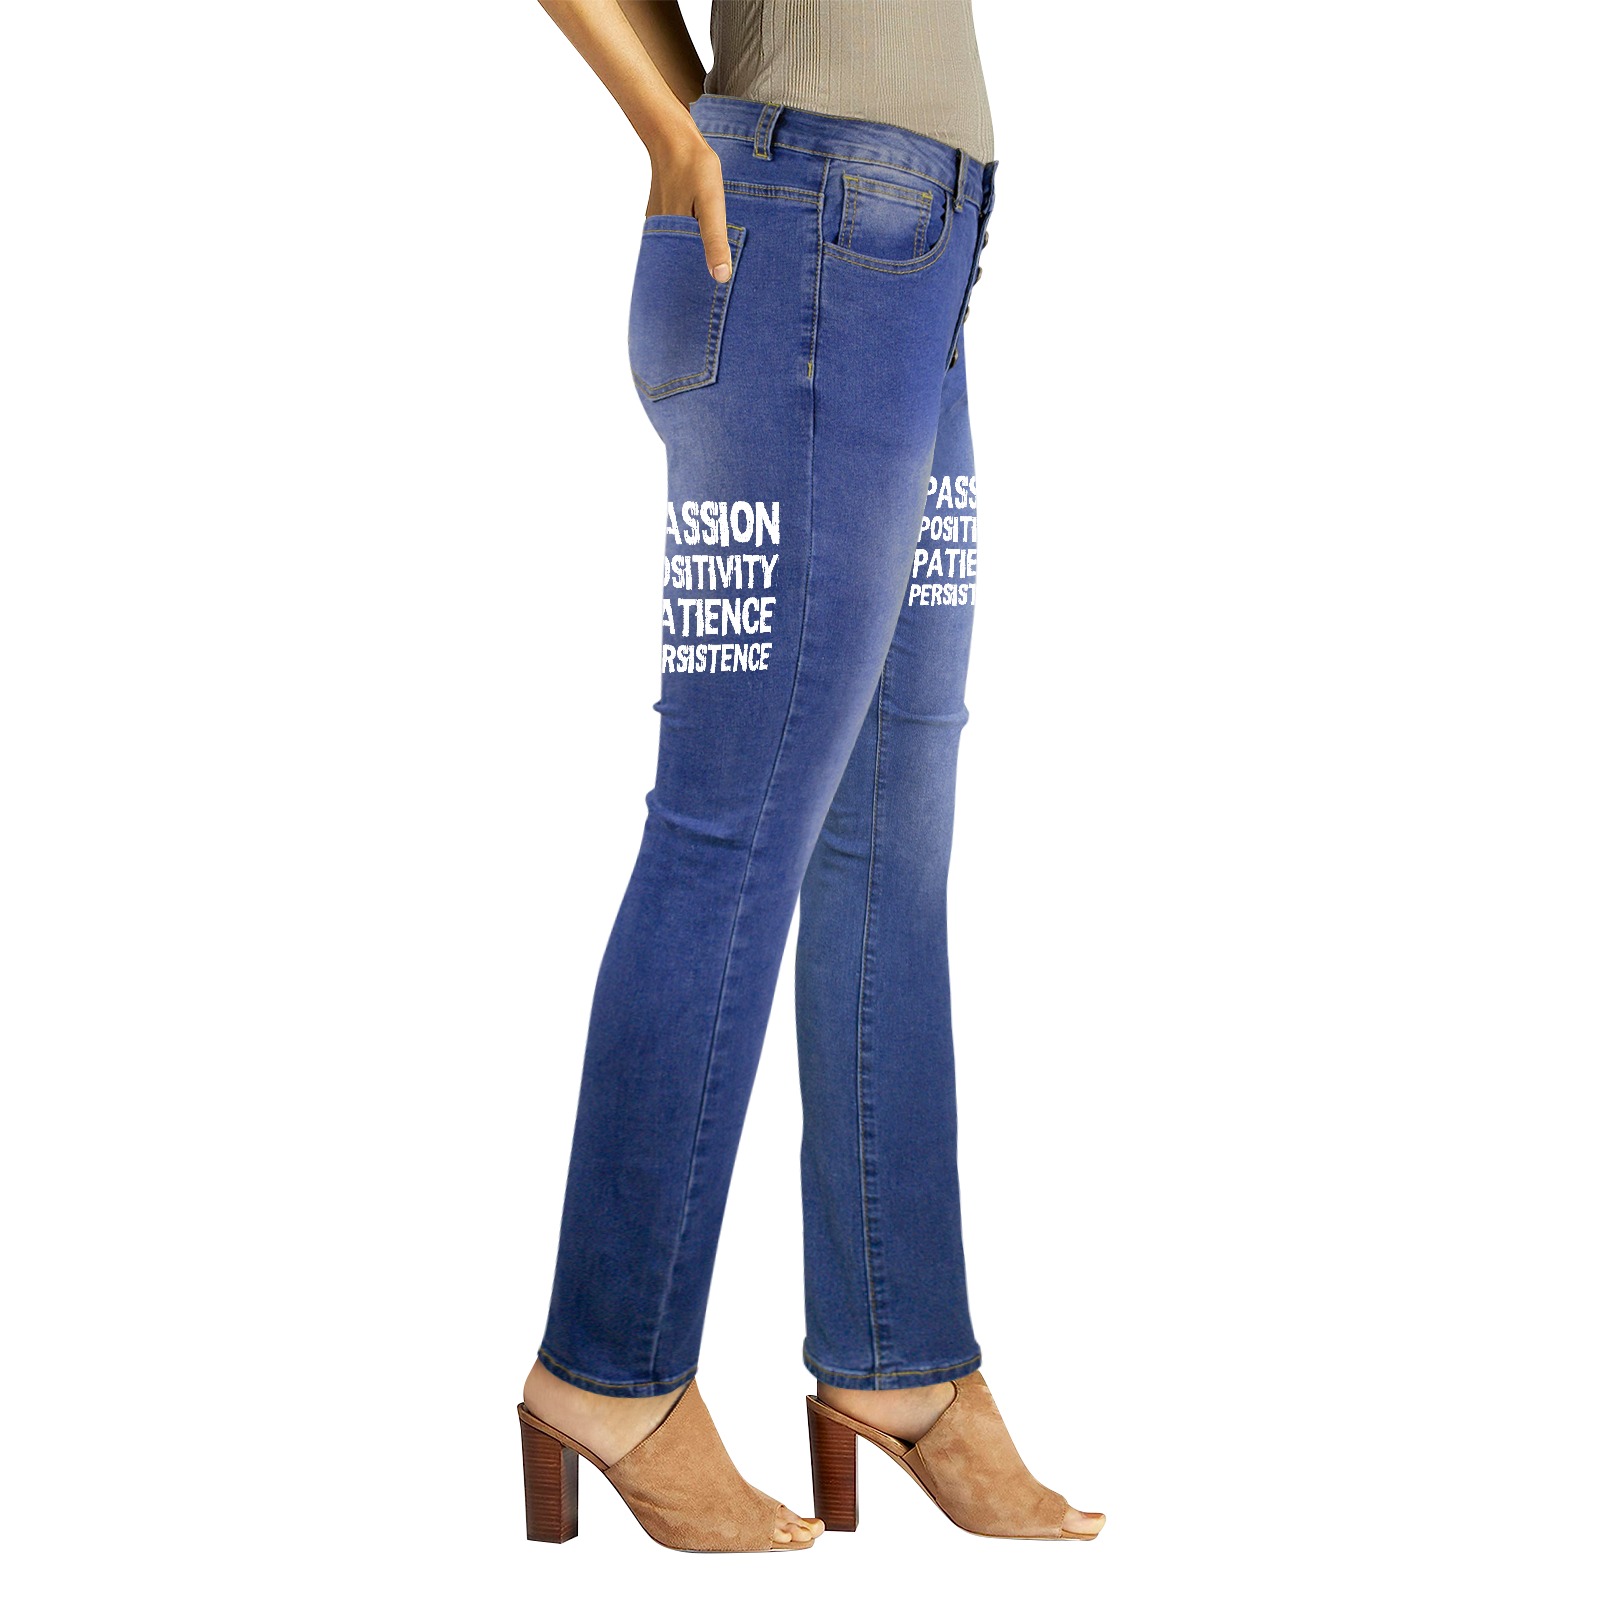 Passion, positivity, patience, persistence white Women's Jeans (Front&Back Printing)